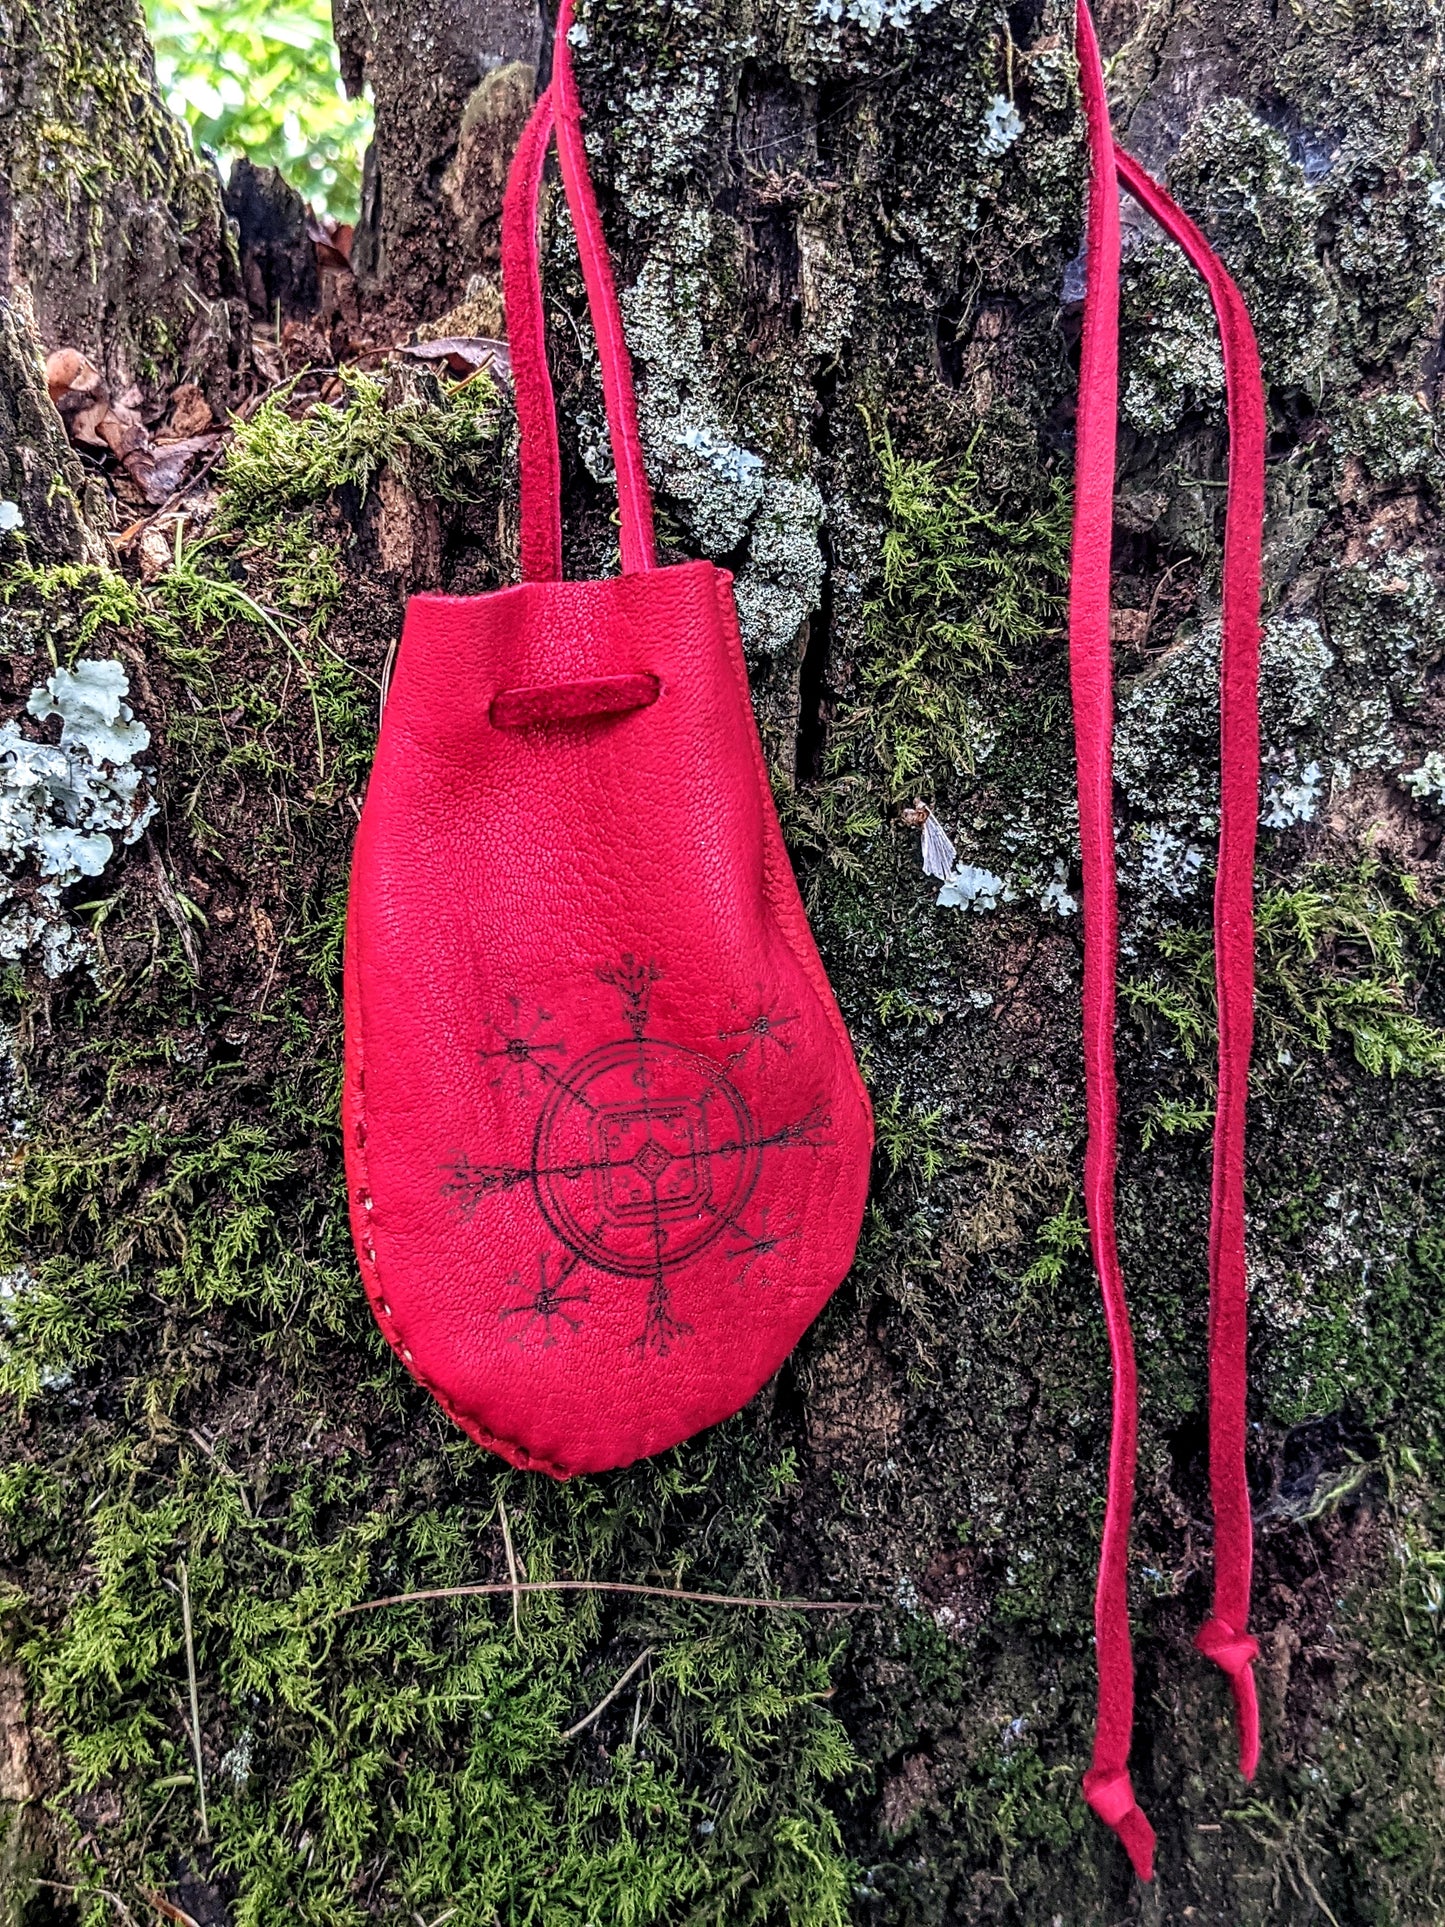 Red Hulinhjalmur (“Helm Of Disguise”)  Stave Buckskin Leather 2x3 Medicine Bag Neck Pouch Rune Norse Pagan